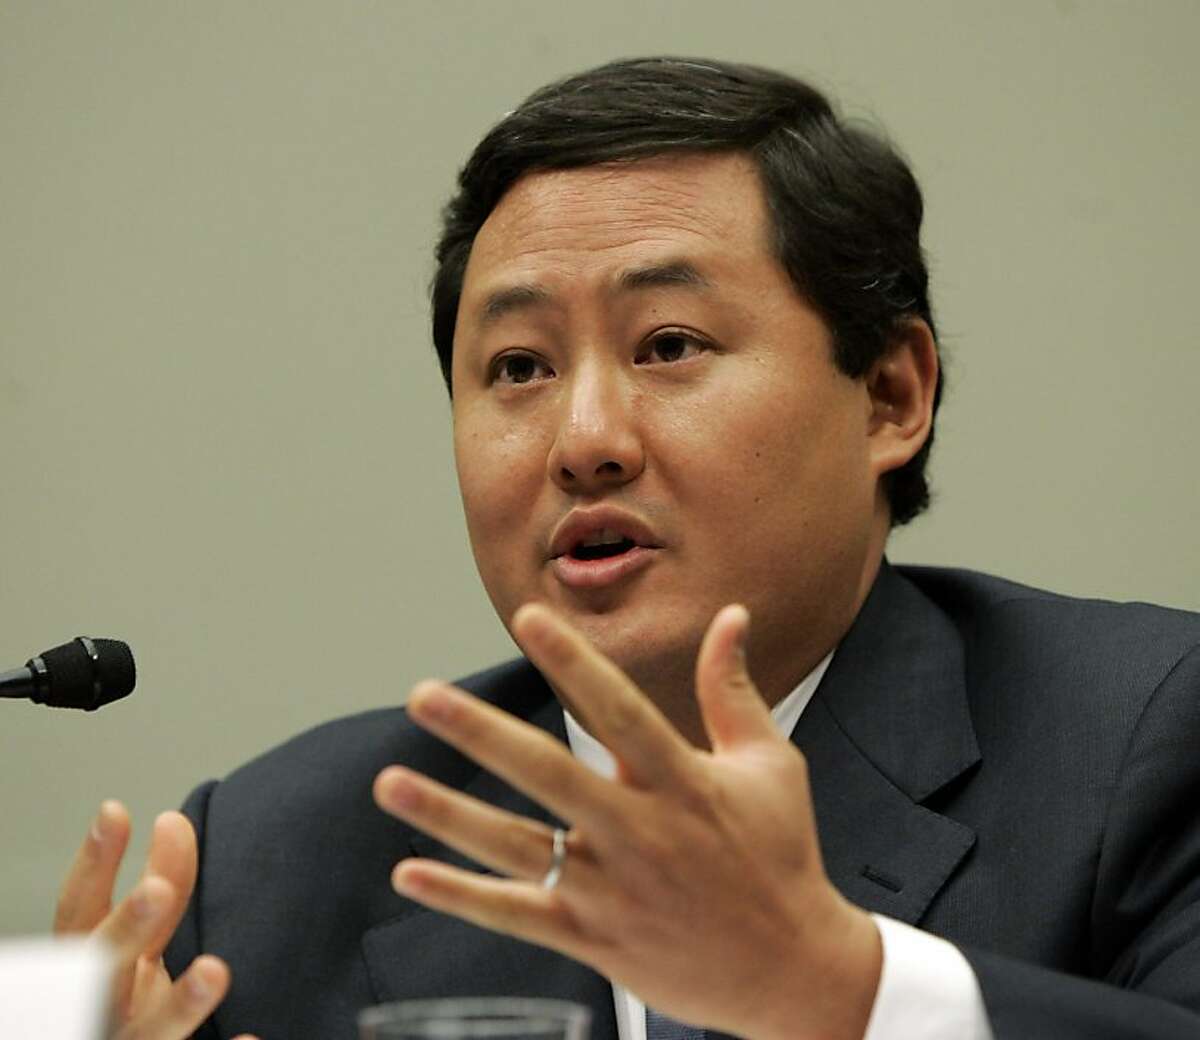 FILE - In this Thursday, June 26, 2008 photo, John Yoo, a law professor at the University of California at Berkeley, testifies on Capitol Hill in Washington. Former Justice Department lawyers Jay Bybee and John Yoo showed "poor judgment" but did not commit professional misconduct when they authorized CIA interrogators to use waterboarding and other harsh tactics at the height of the U.S. war on terrorism, an internal review released Friday, Feb. 19, 2010 found.